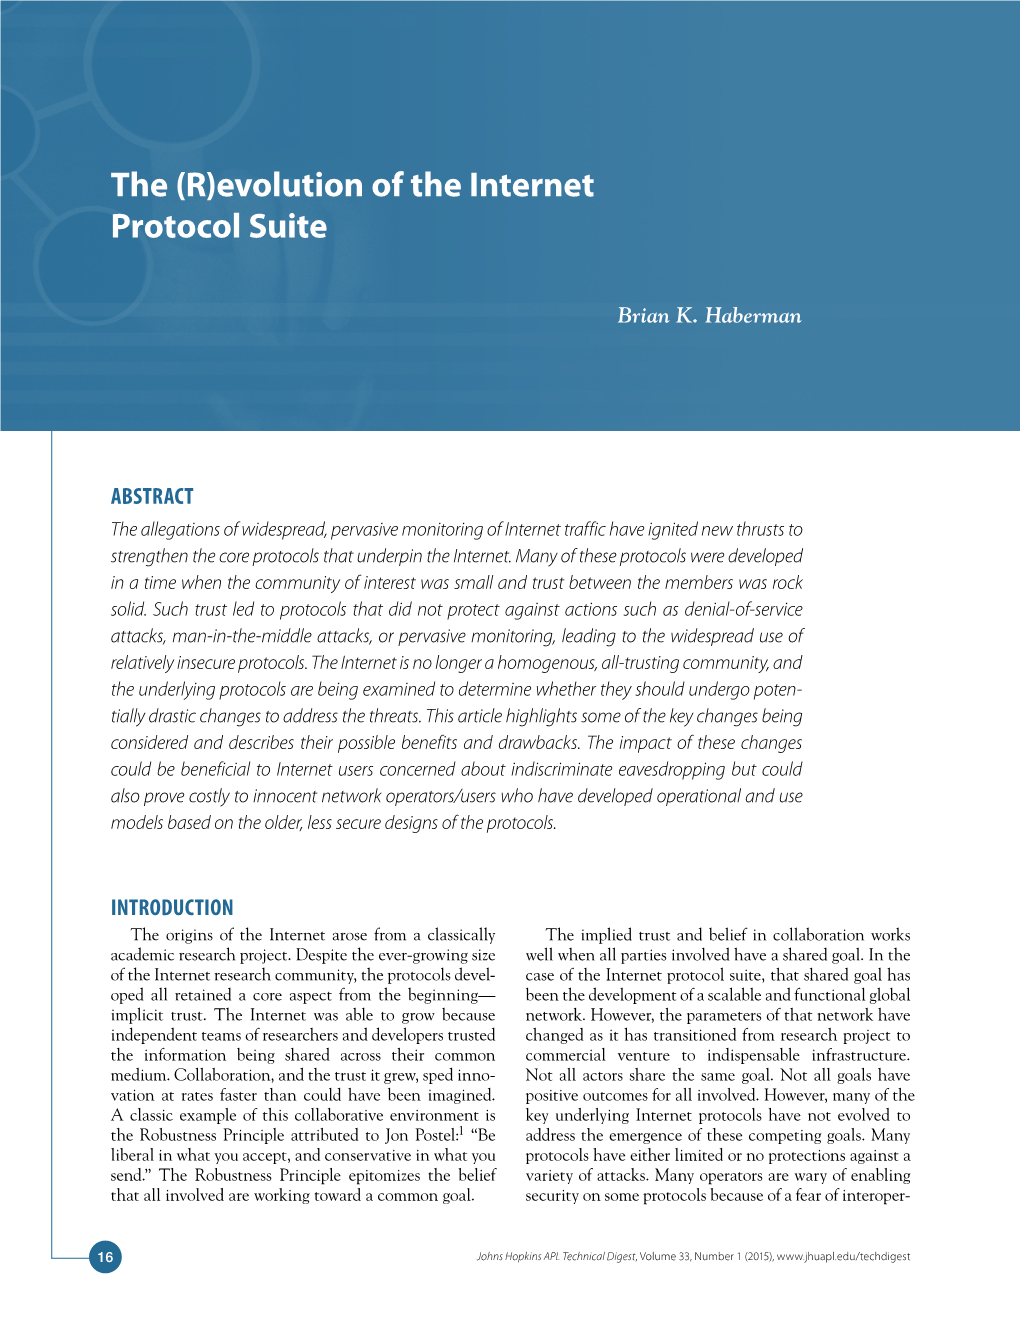 Evolution of the Internet Protocol Suite